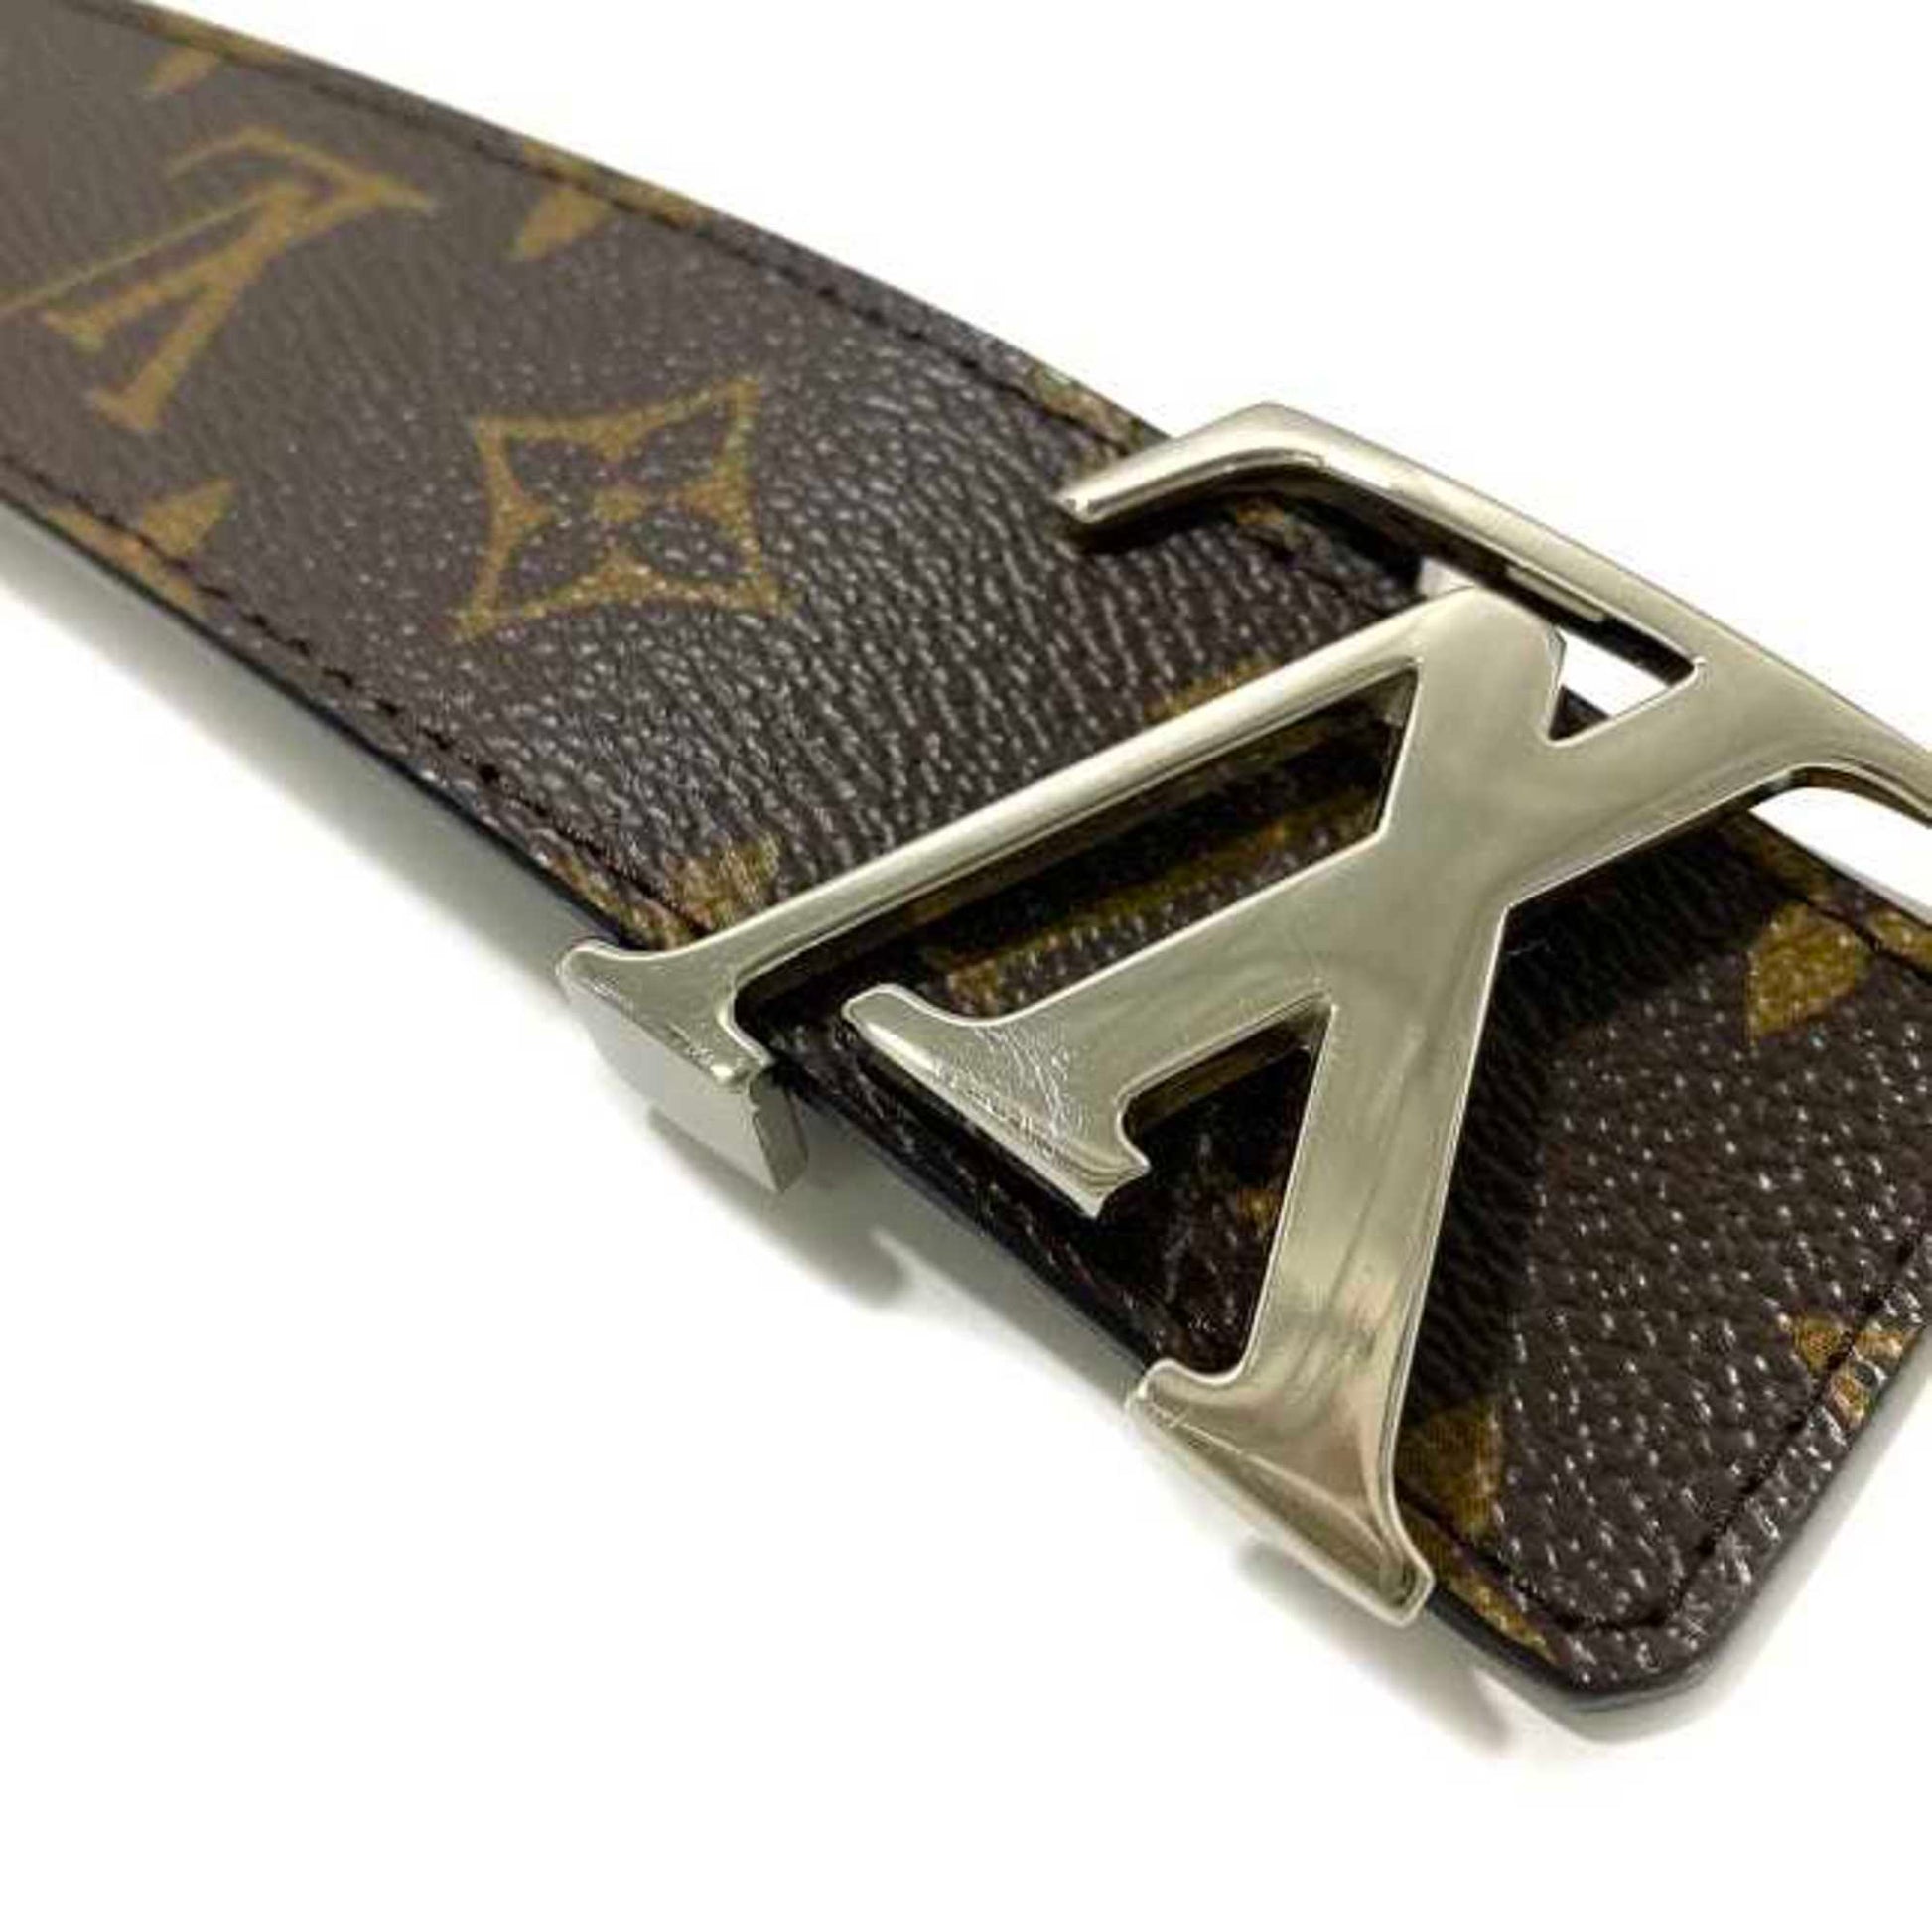 Authenticated Used Louis Vuitton Belt Centure LV Initial Brown